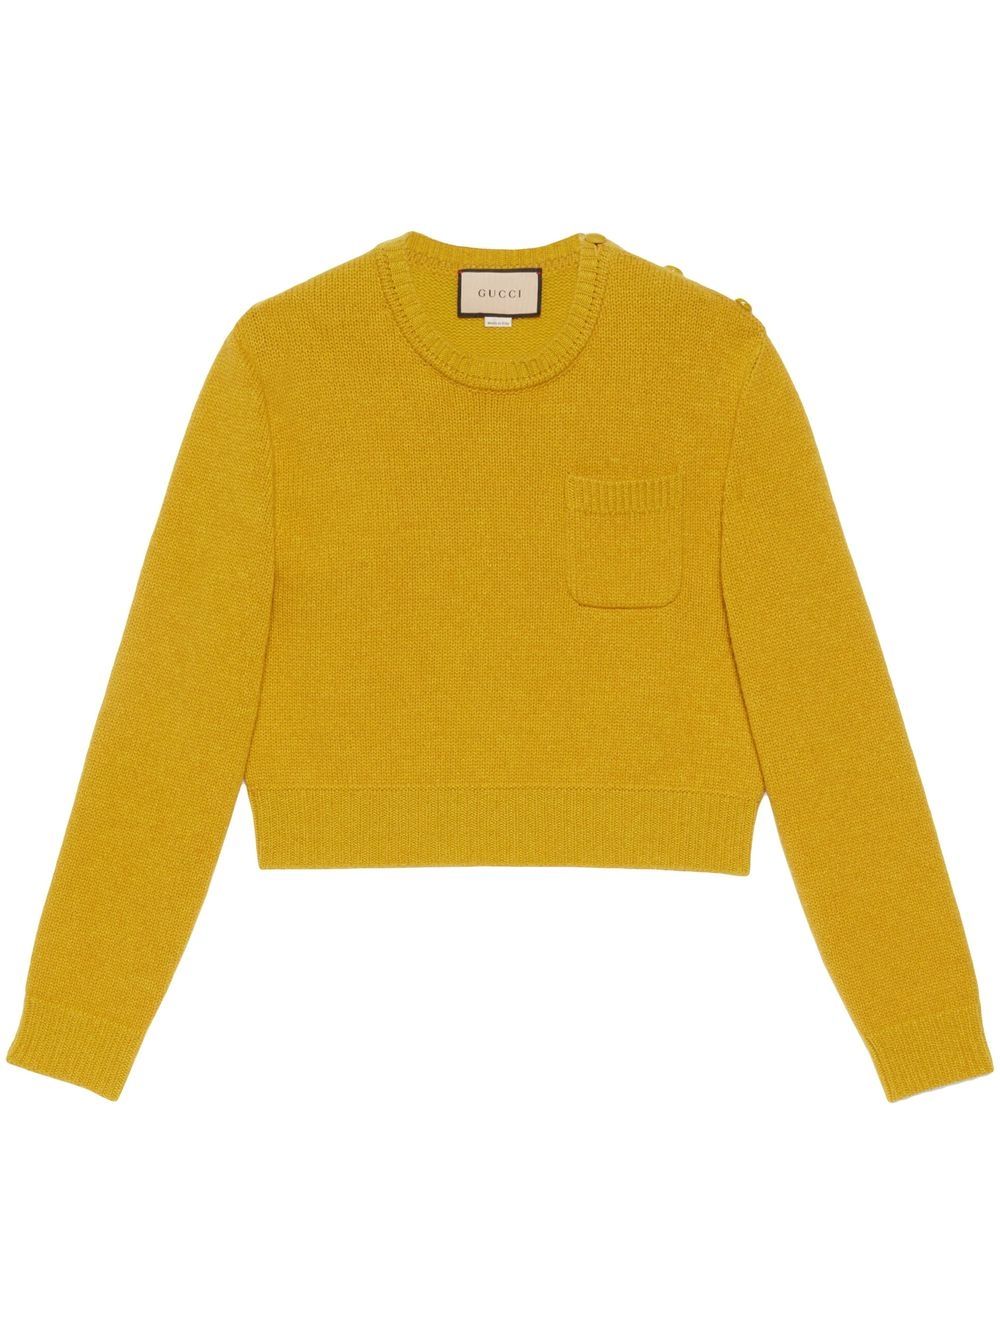 GucciCashmere Blend Jumper at Fashion Clinic